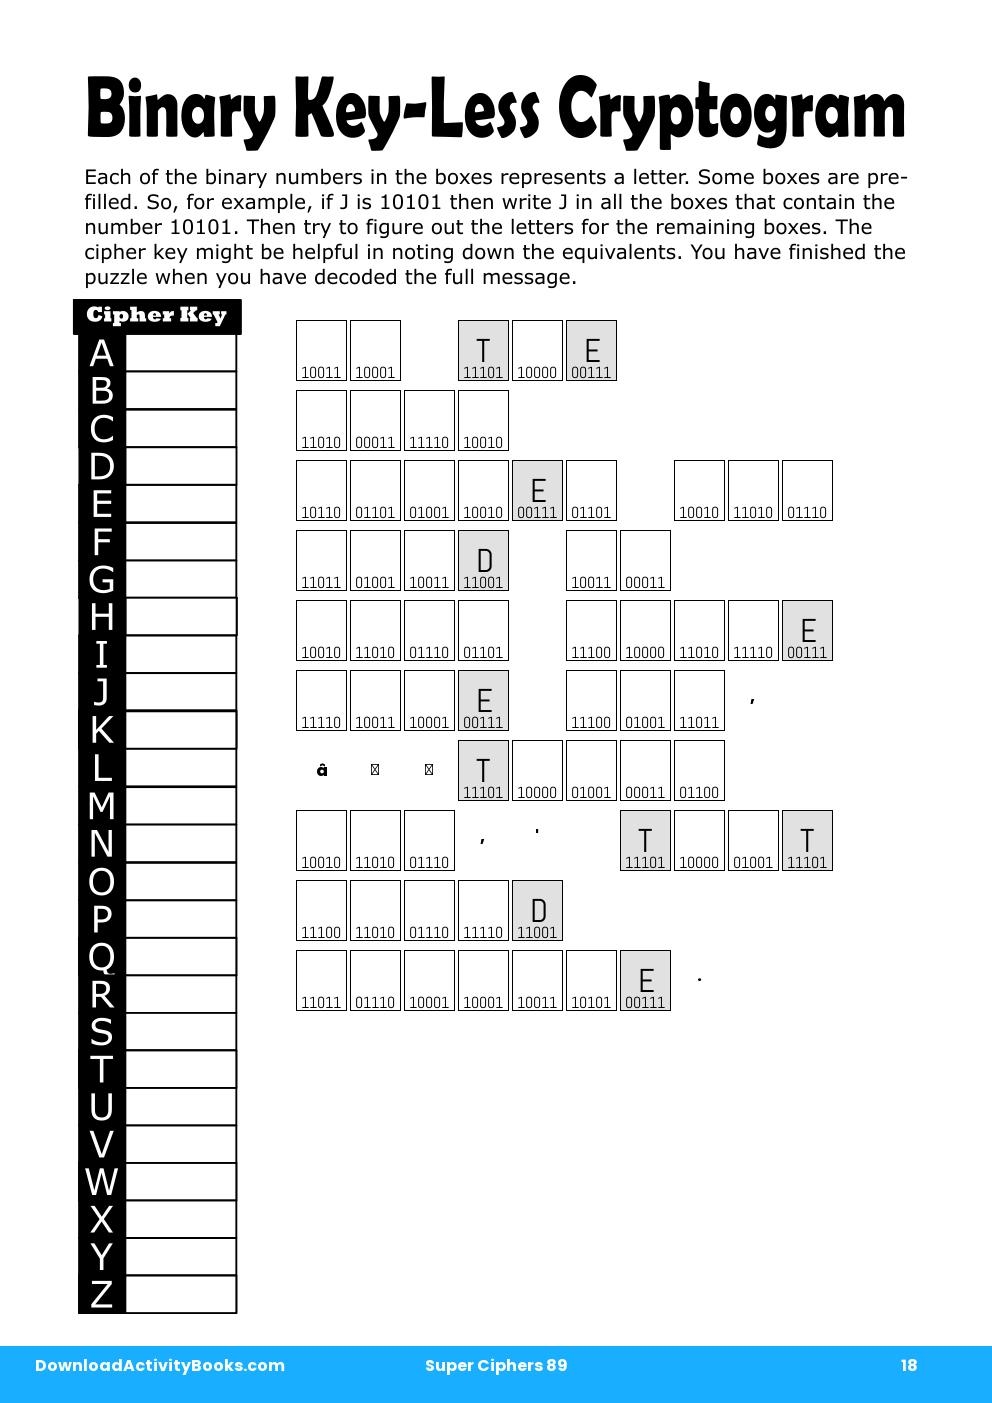 Binary Key-Less Cryptogram in Super Ciphers 89